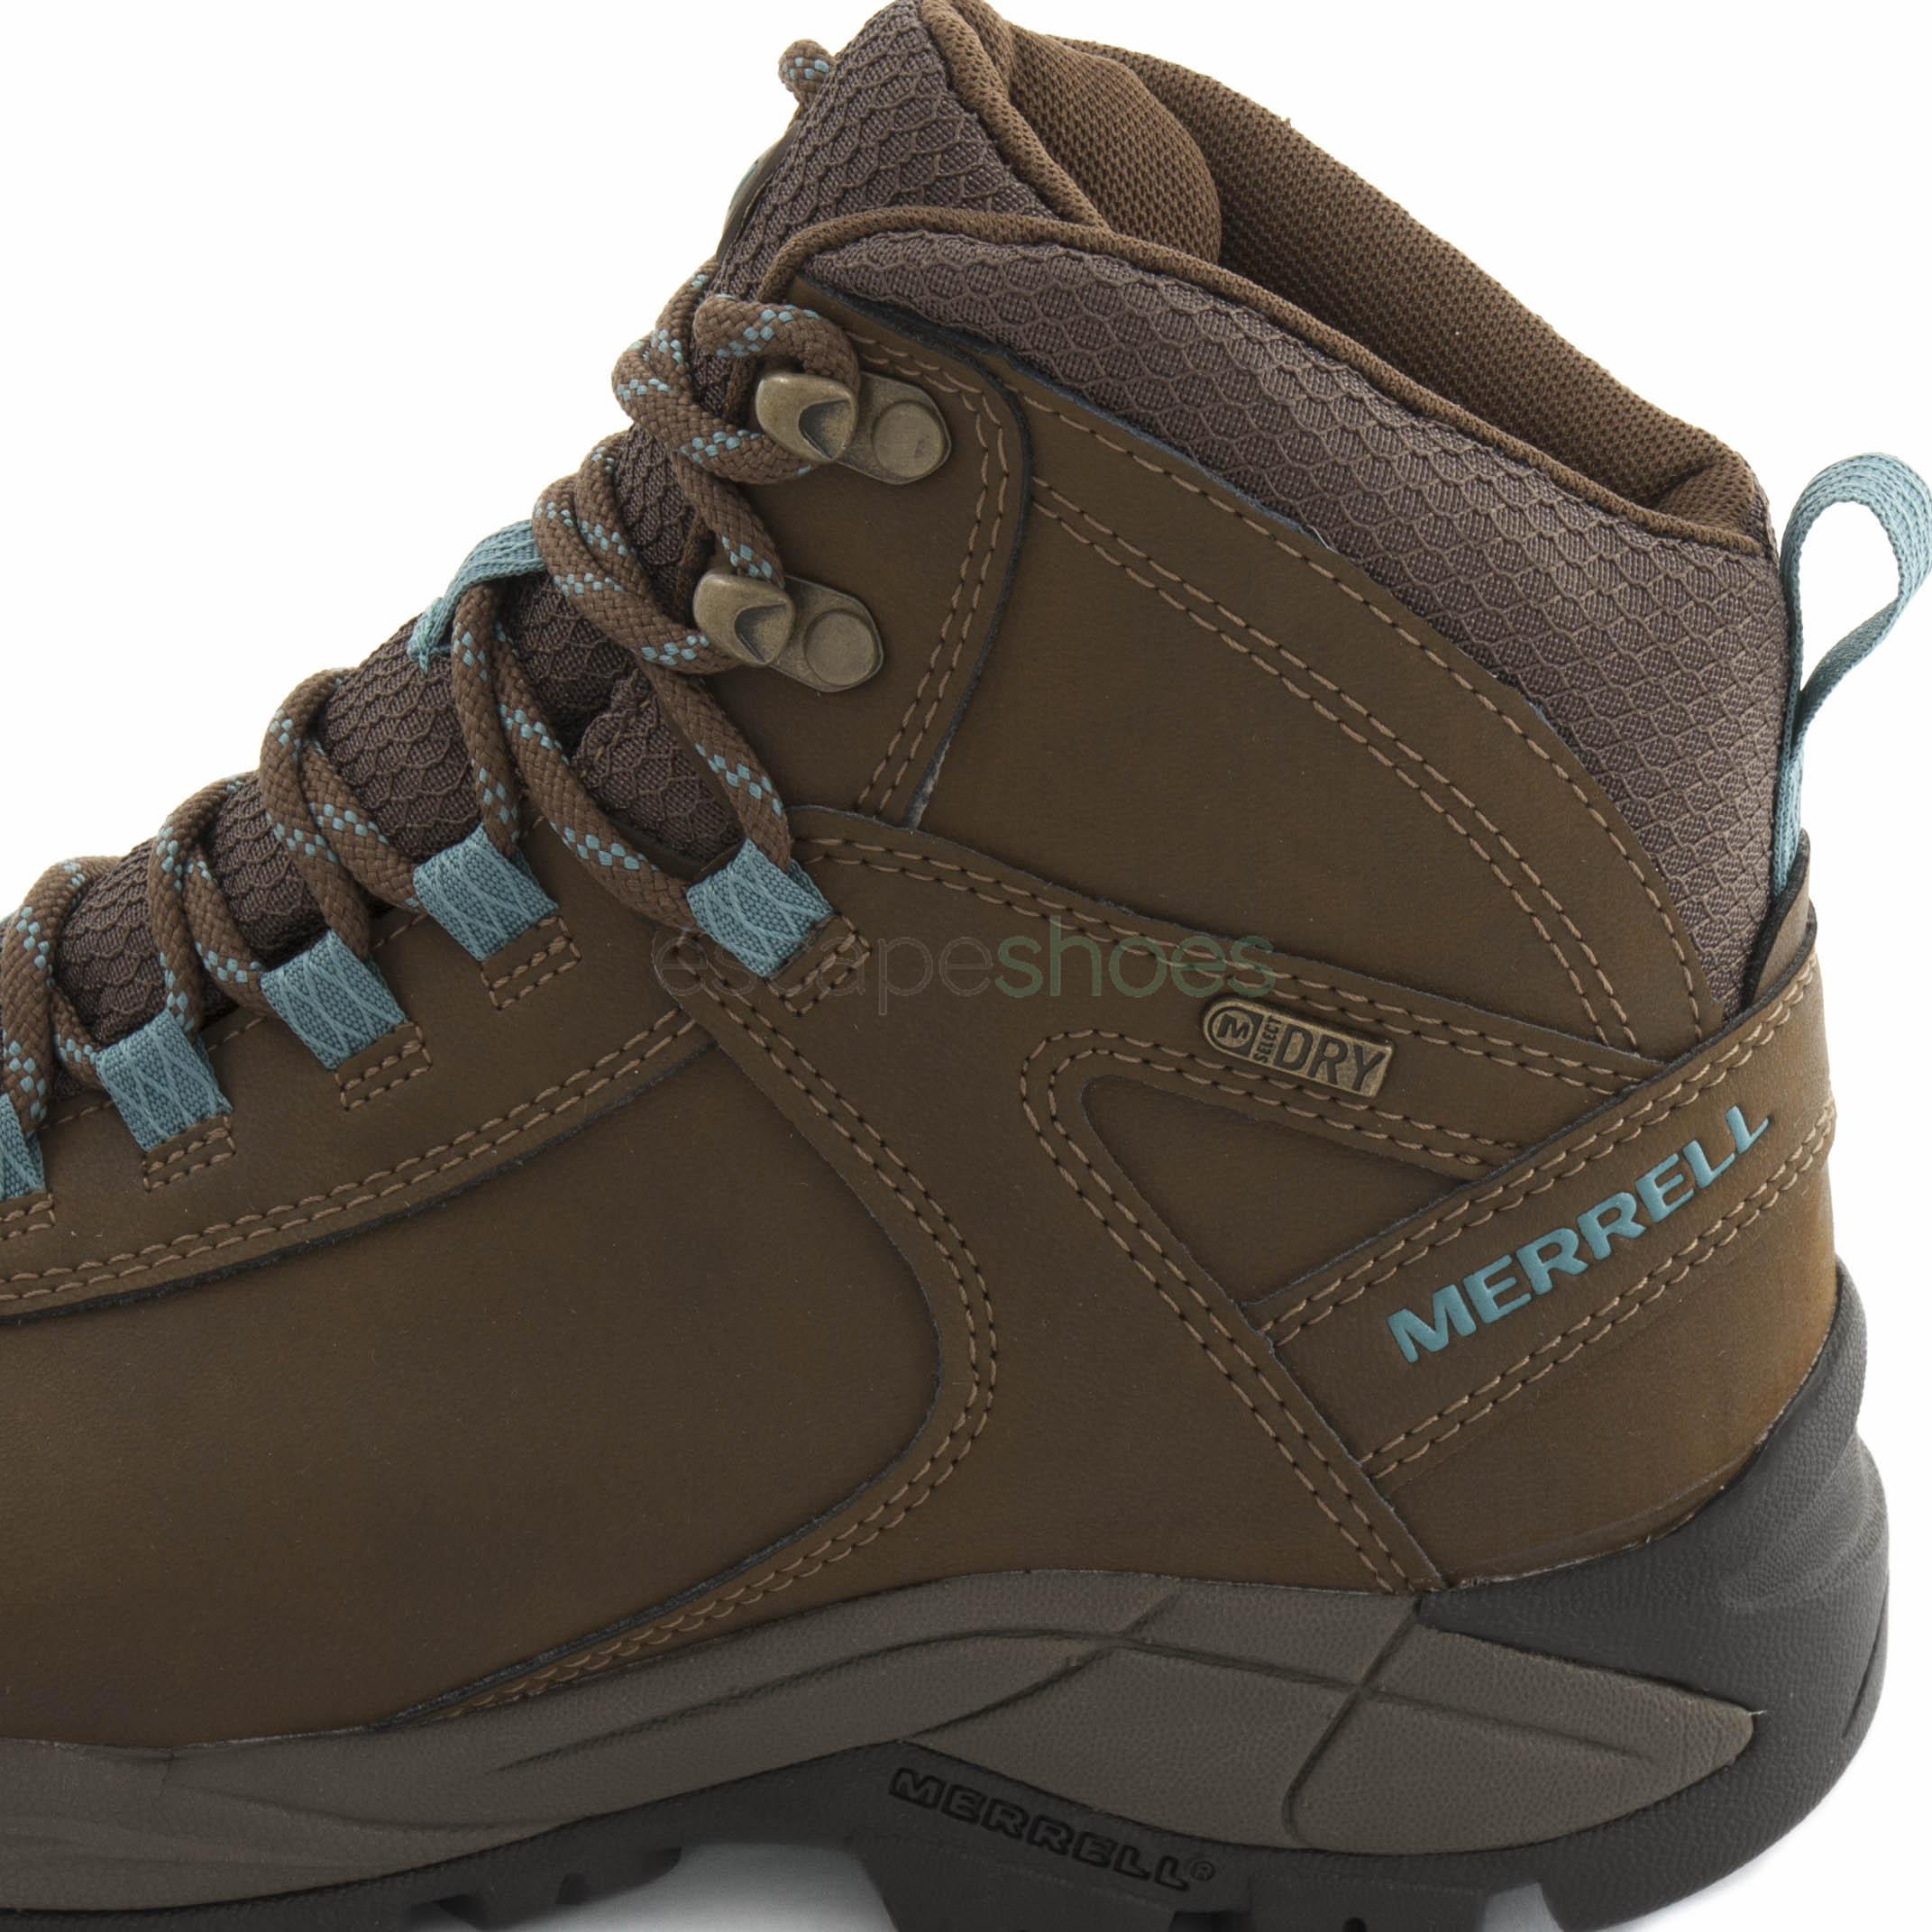 Reproduce For a day trip Arise Merrell Vego Mid Ltr Wtpf Hot Deal, 48% OFF | irradia.com.es